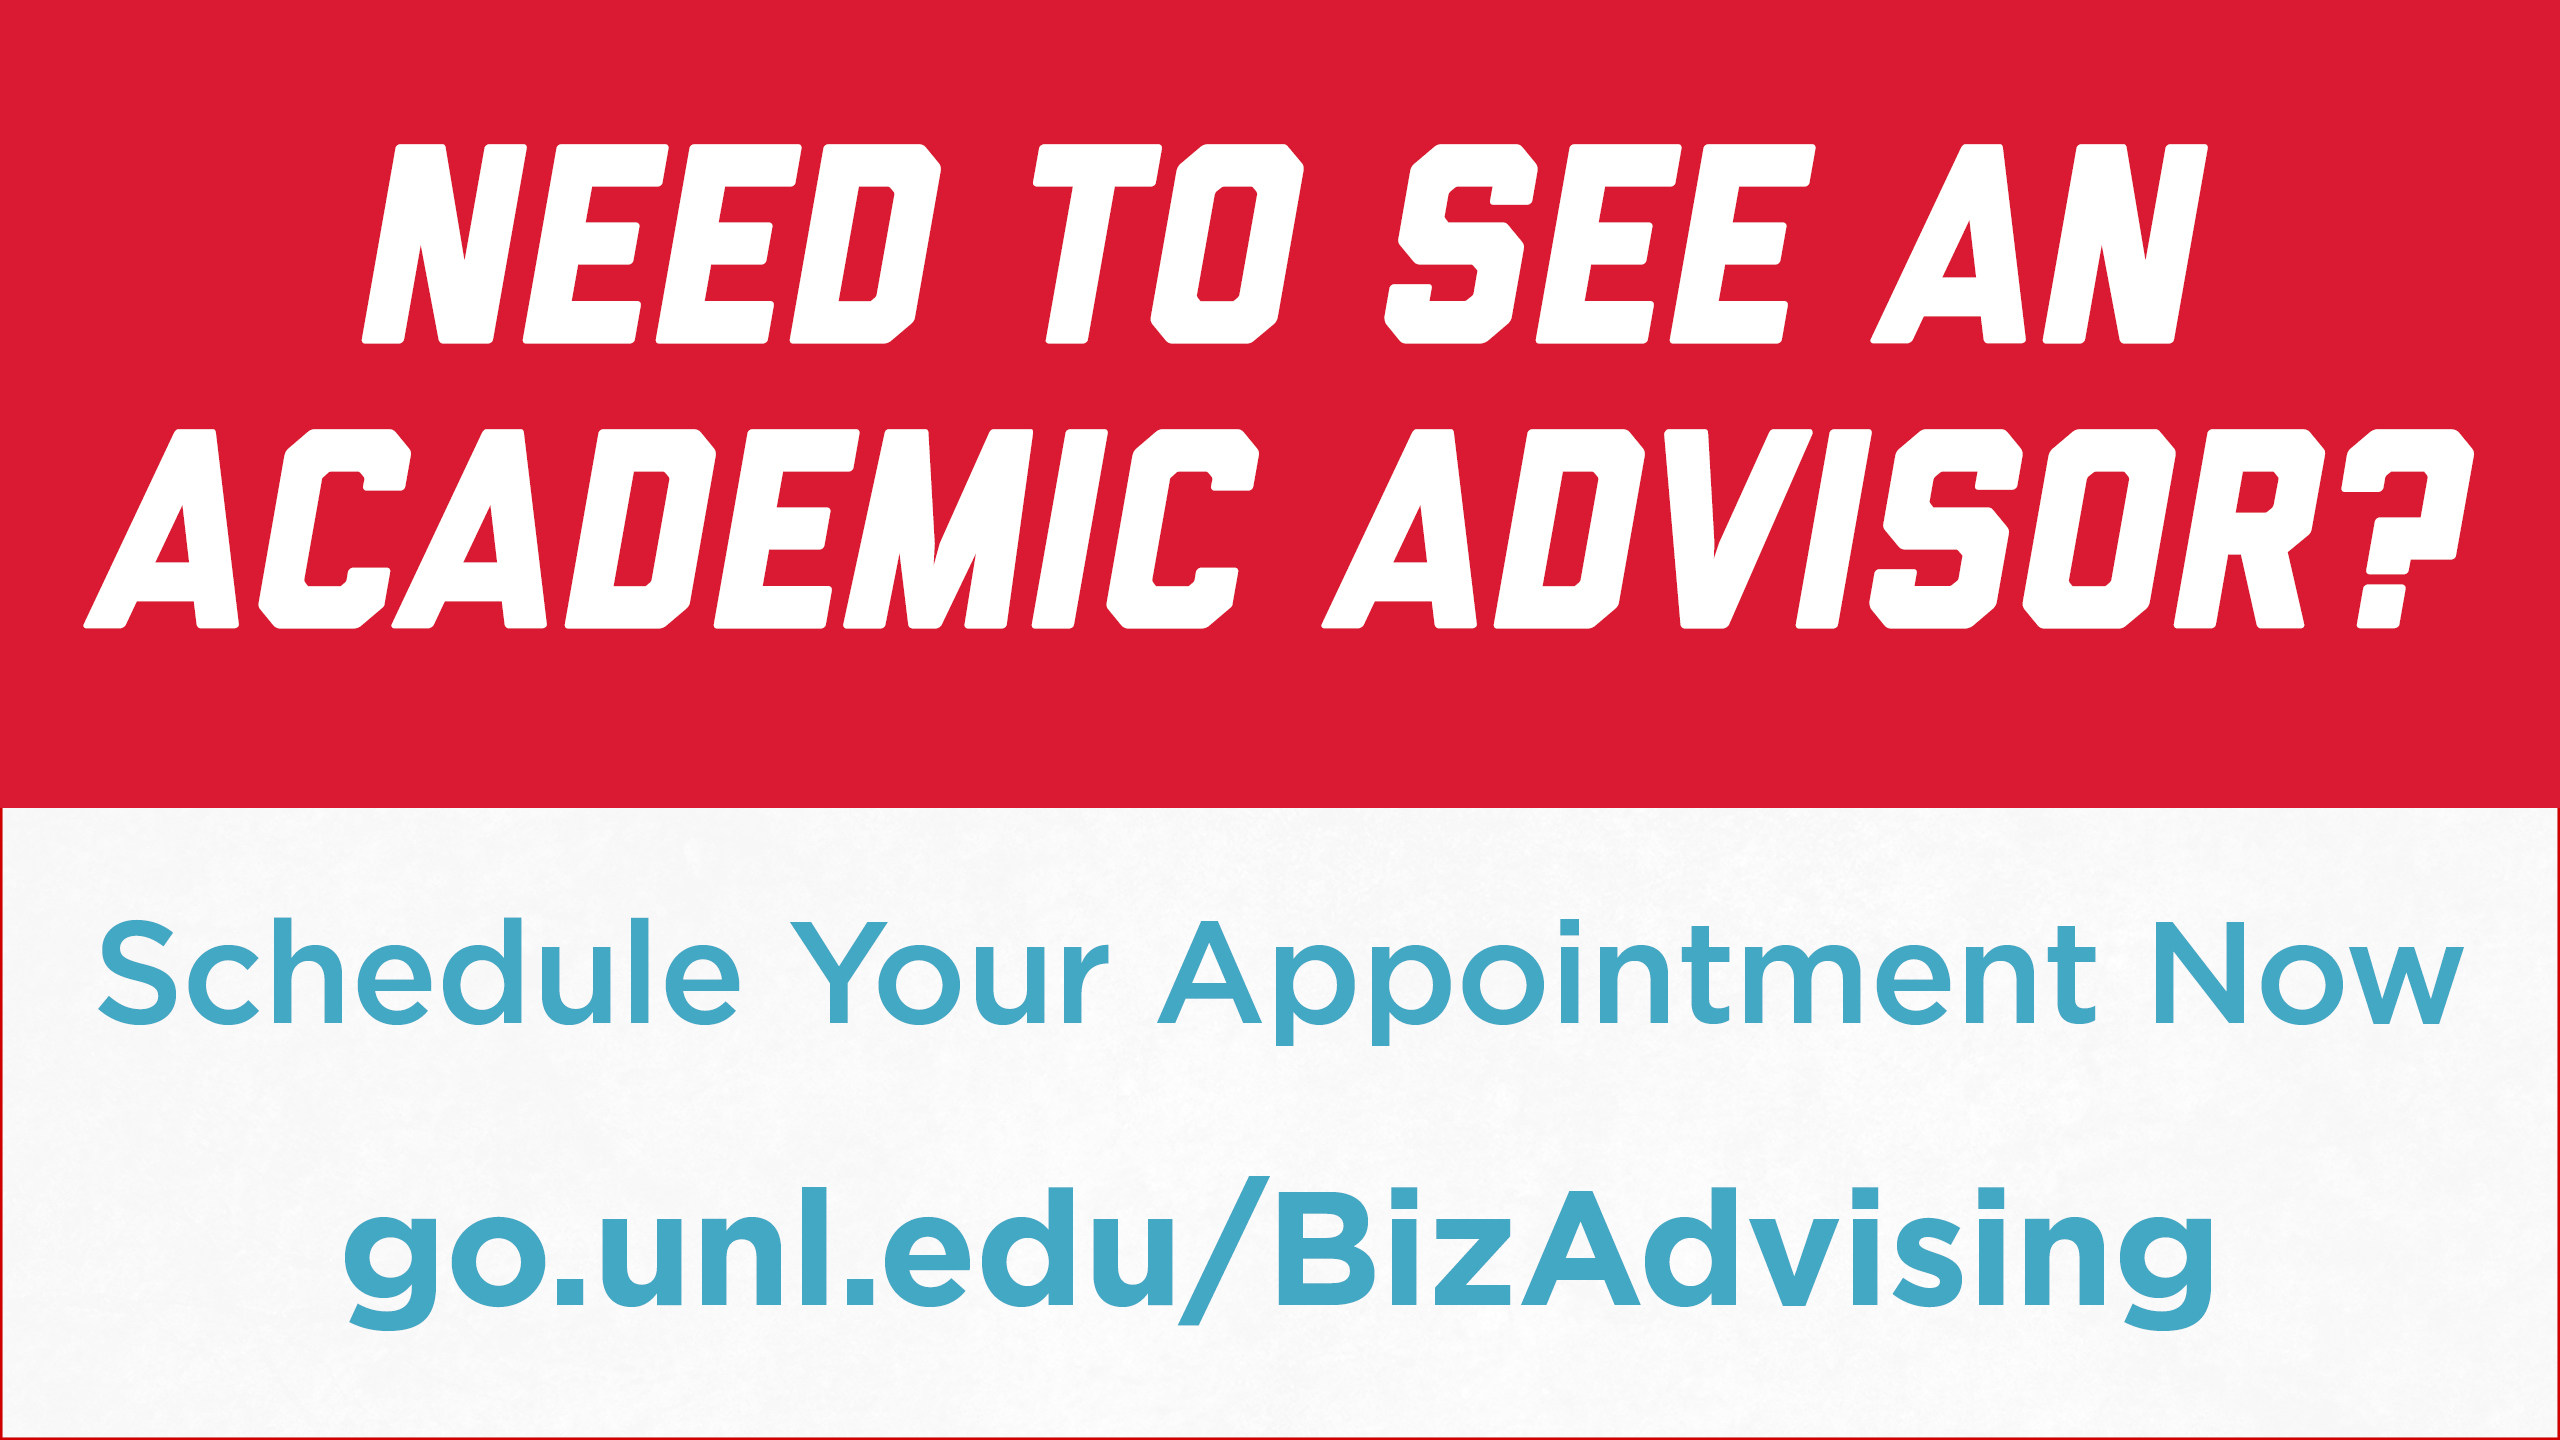 Academic advisors are available!